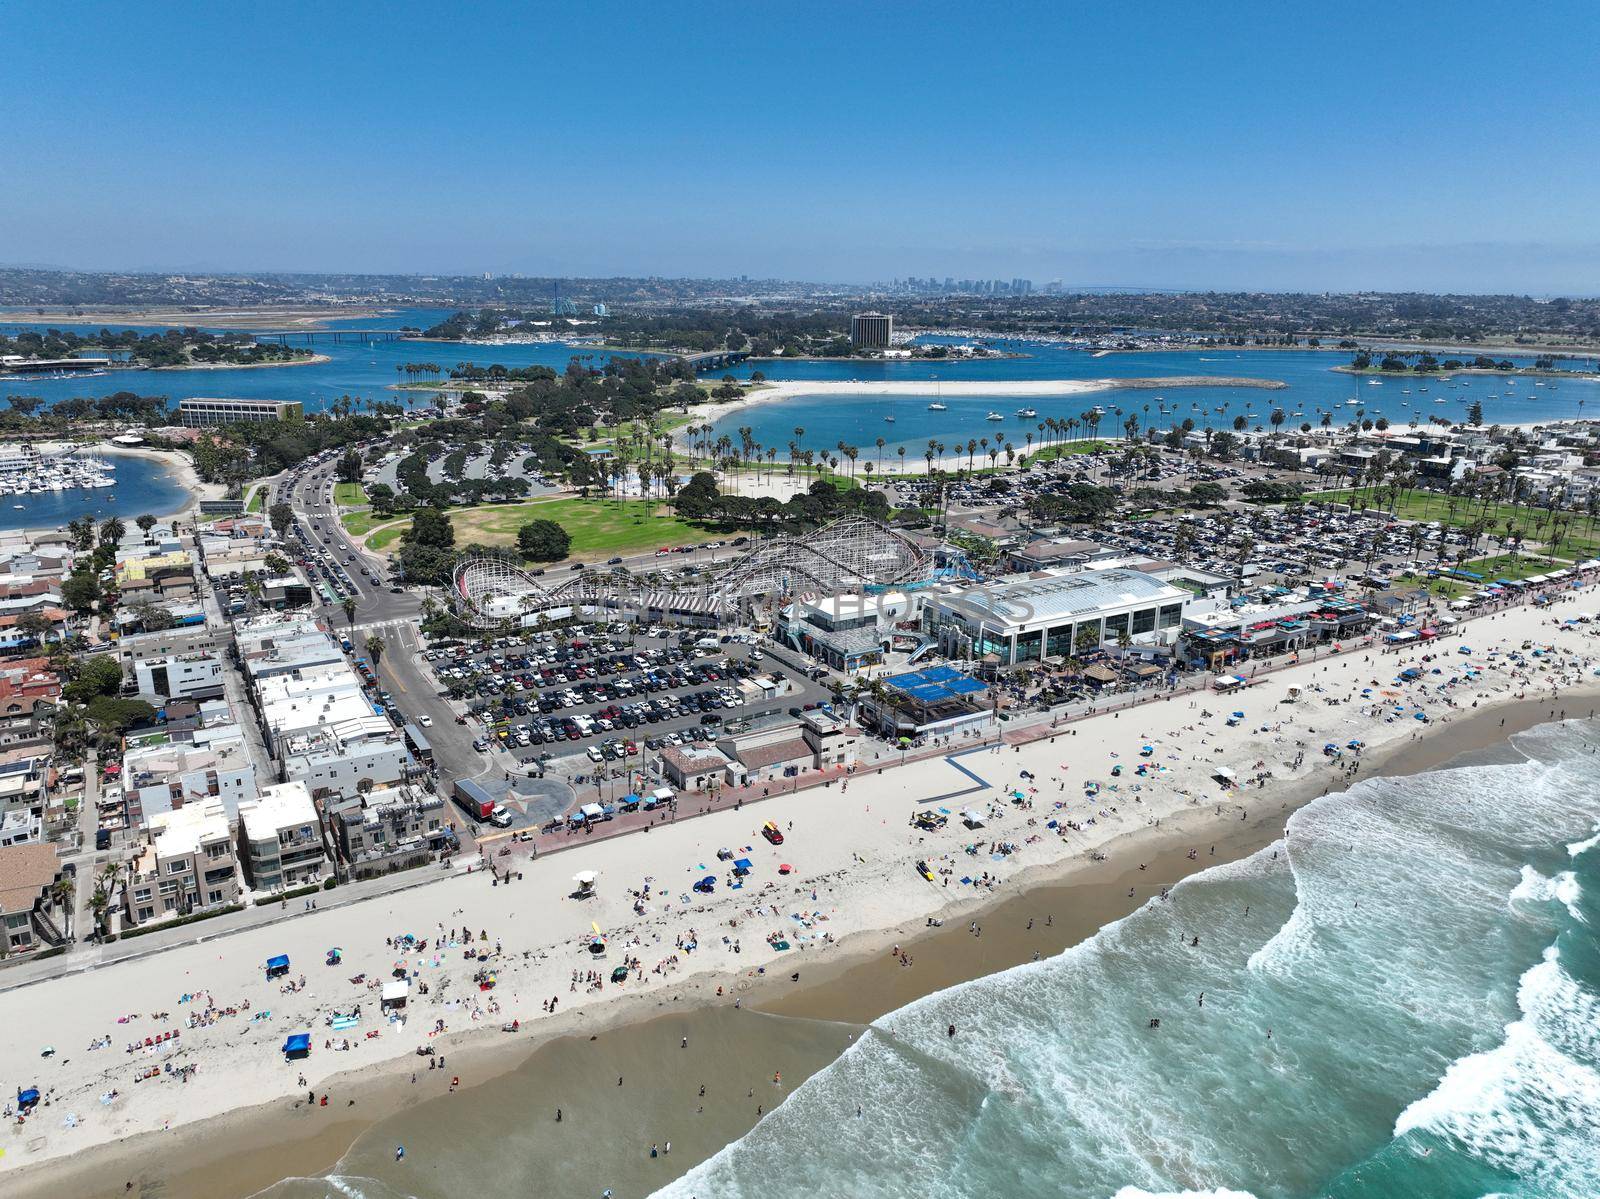 Aerial view of Belmont Park, an amusement park built in 1925 on the Mission Beach boardwalk, San Diego, California, USA. August 22nd, 2022